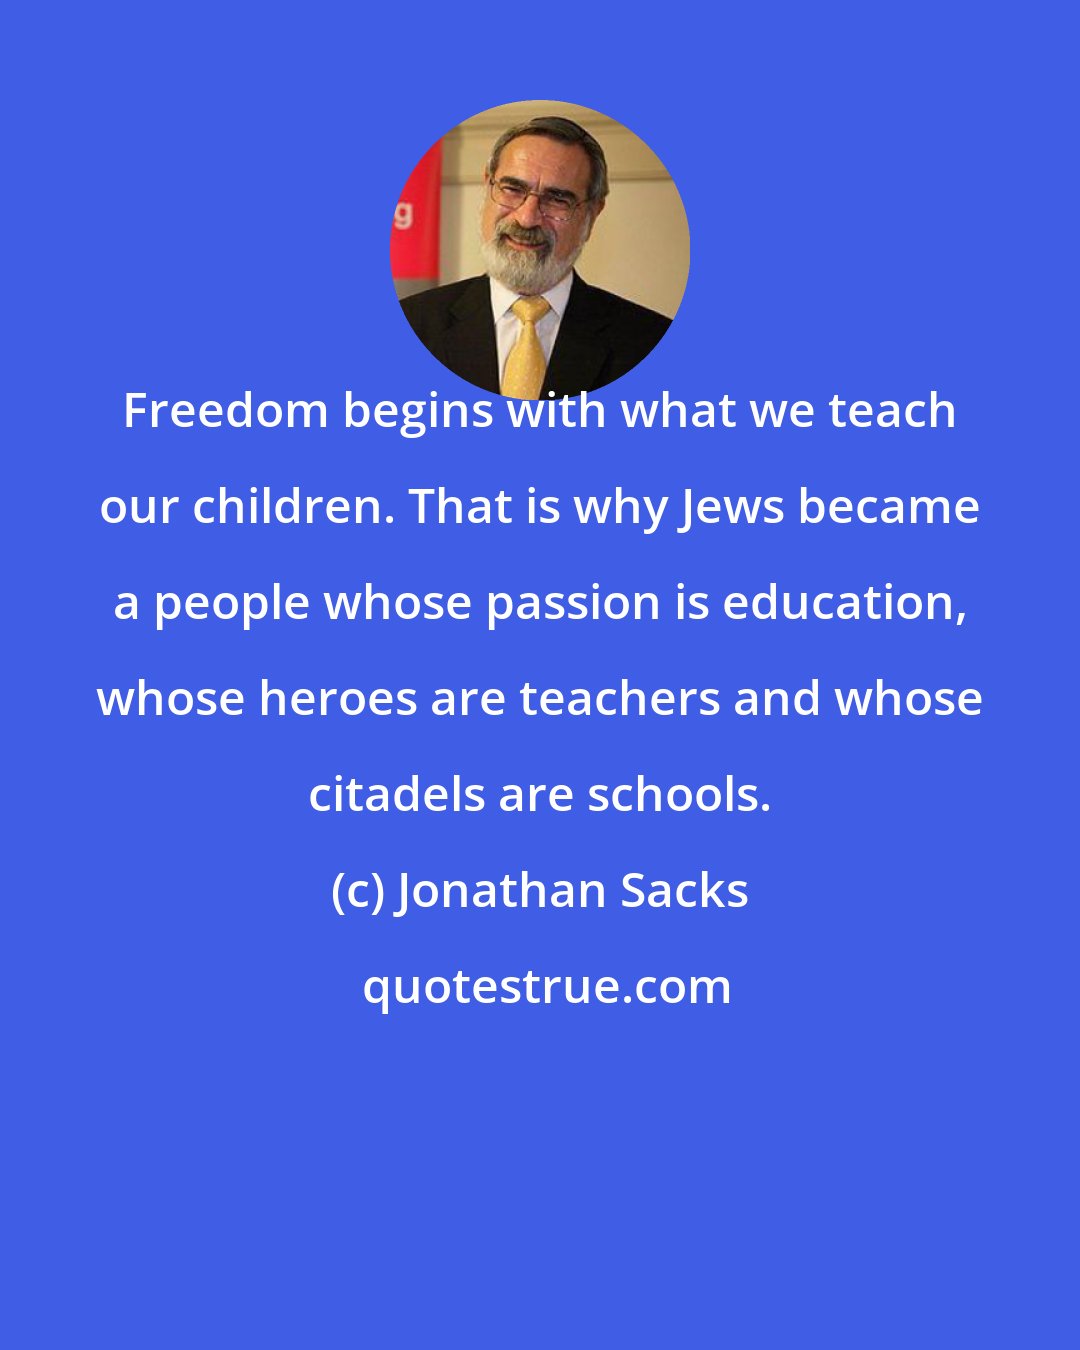 Jonathan Sacks: Freedom begins with what we teach our children. That is why Jews became a people whose passion is education, whose heroes are teachers and whose citadels are schools.